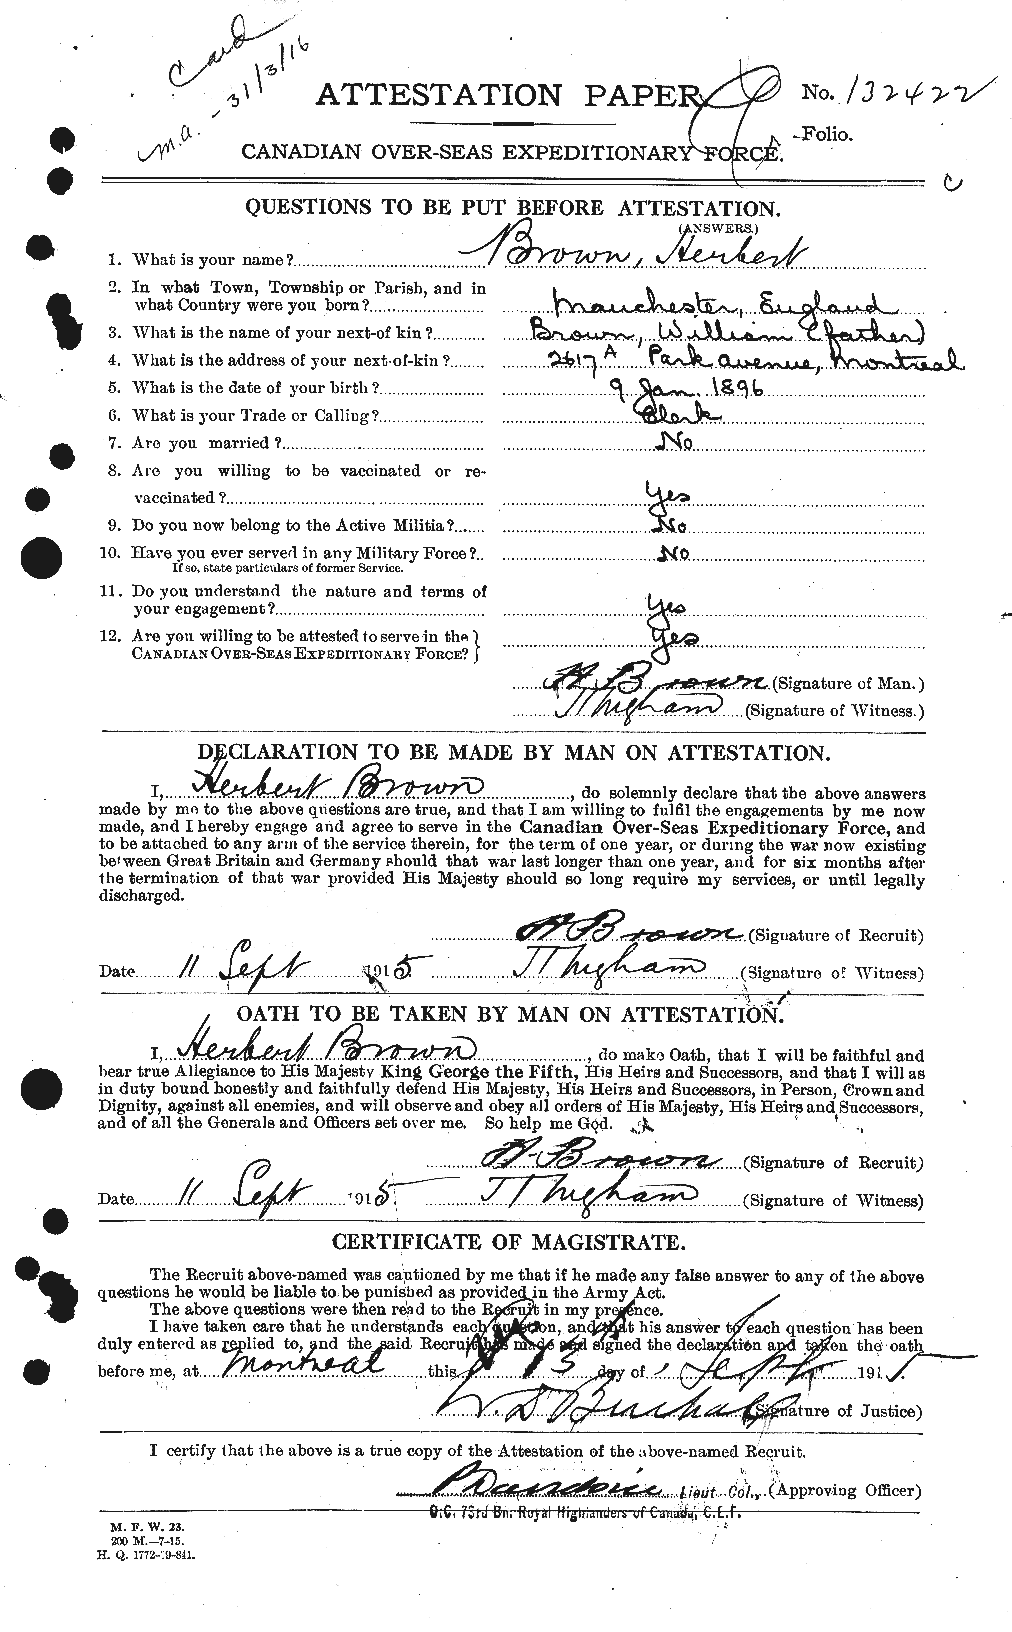 Personnel Records of the First World War - CEF 265556a